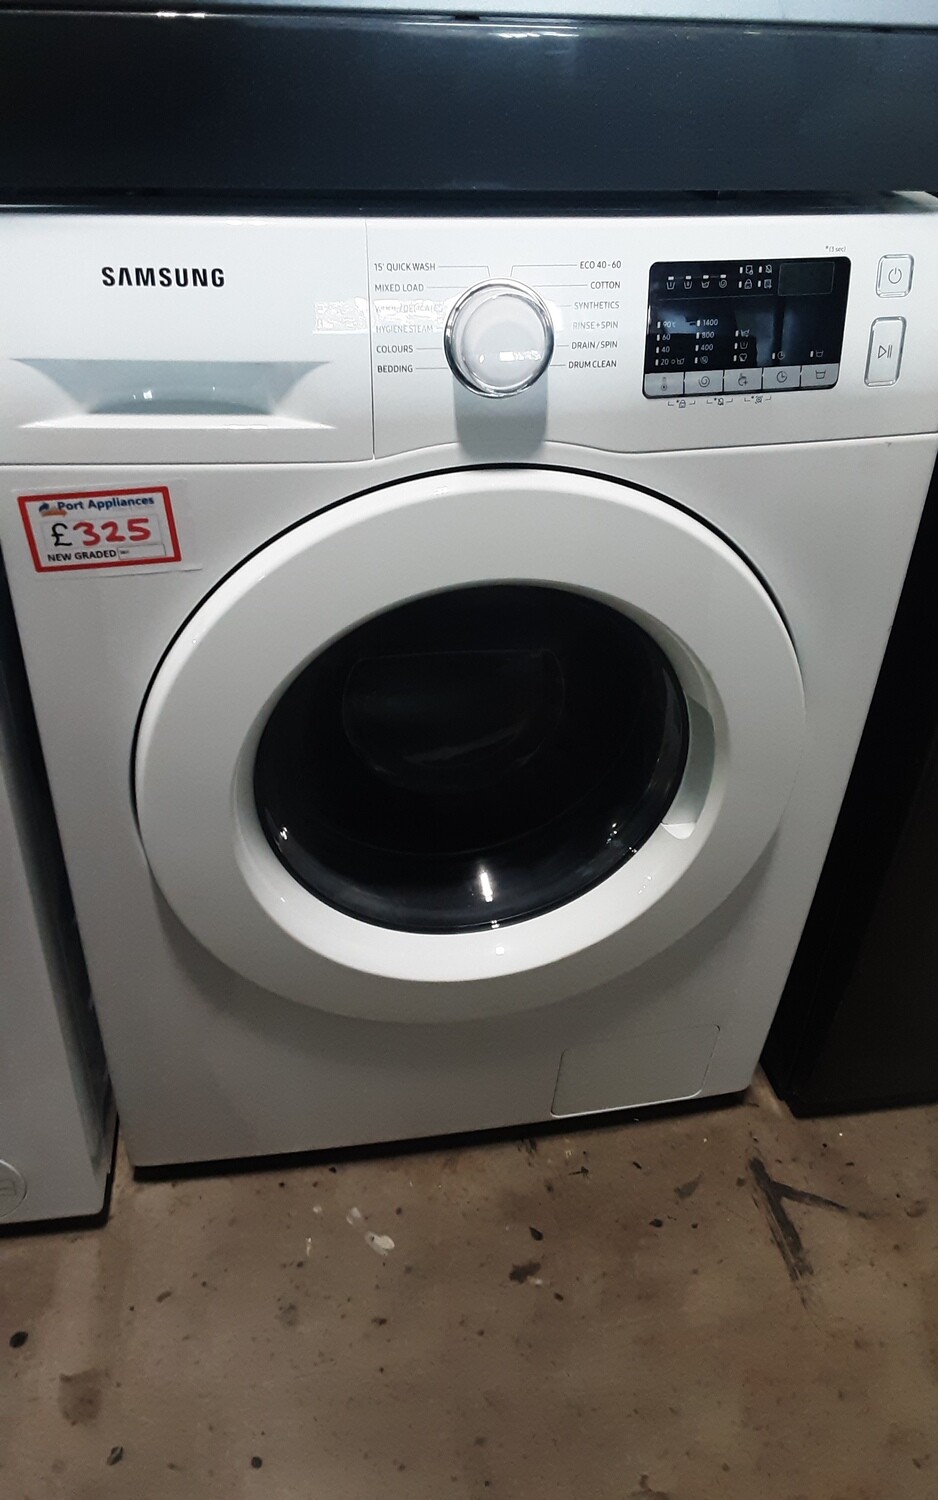 Samsung WW80T40EE 8kg Load, 1400 Spin Washing Machine - White - New Graded + 1 Year Guarantee